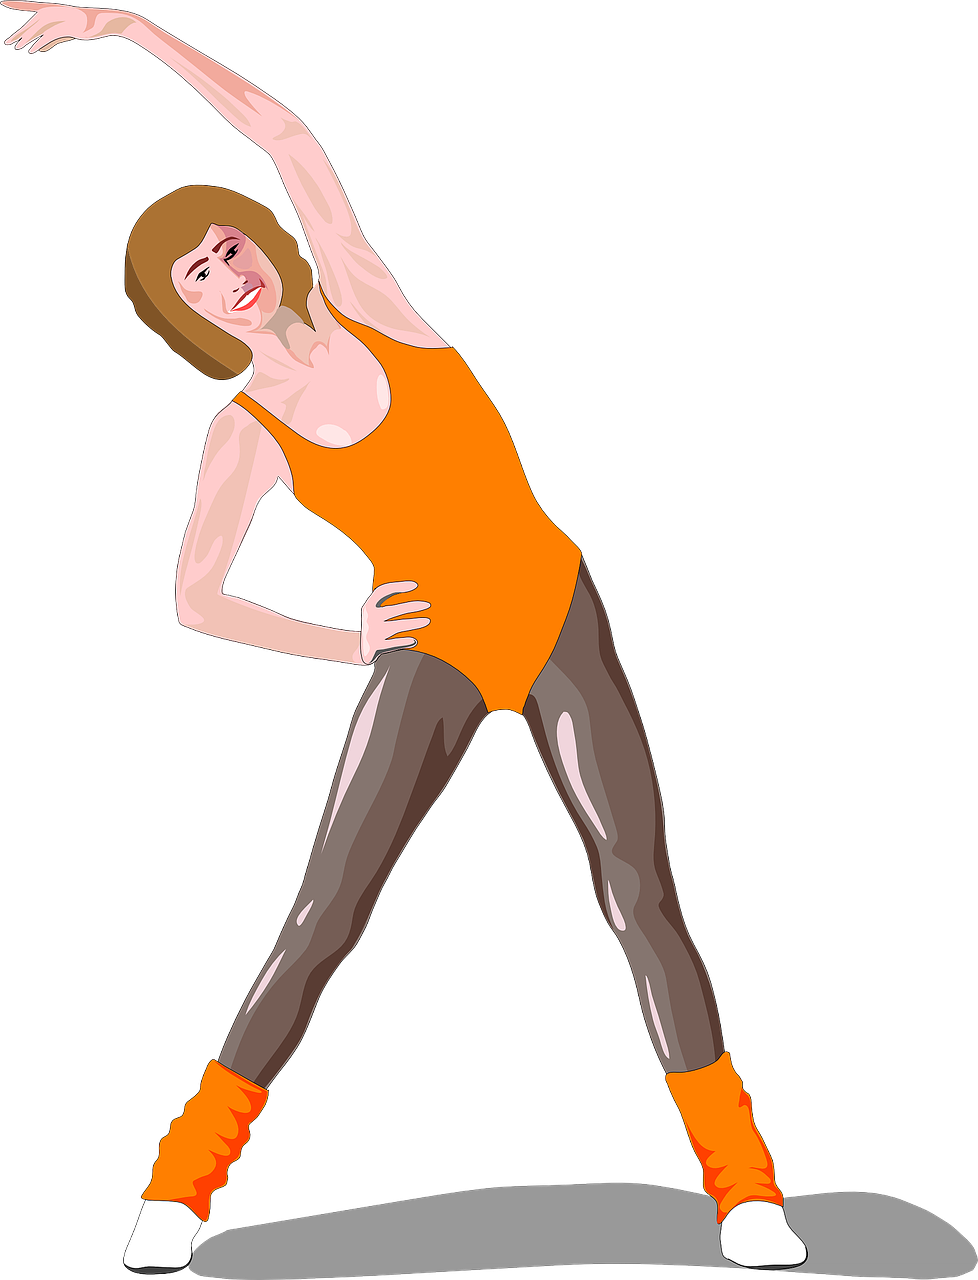 A Woman In Leotard And Leggings